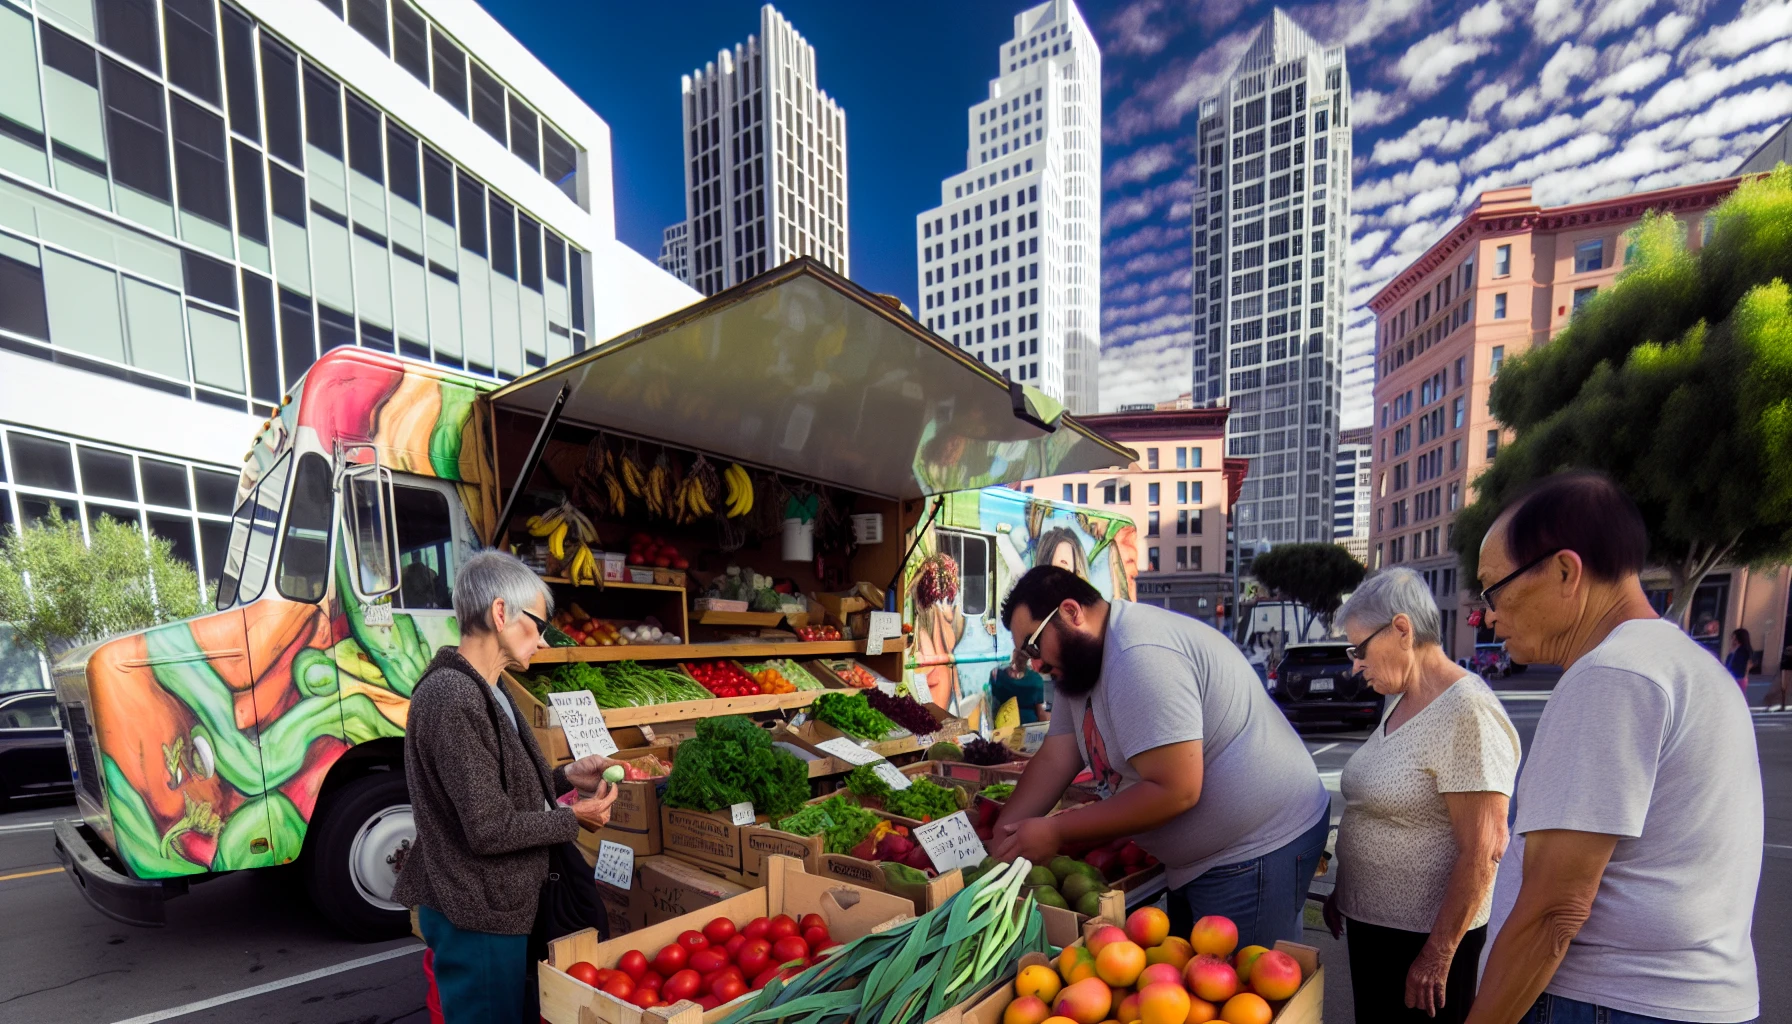 A mobile market with a diverse selection of fresh produce